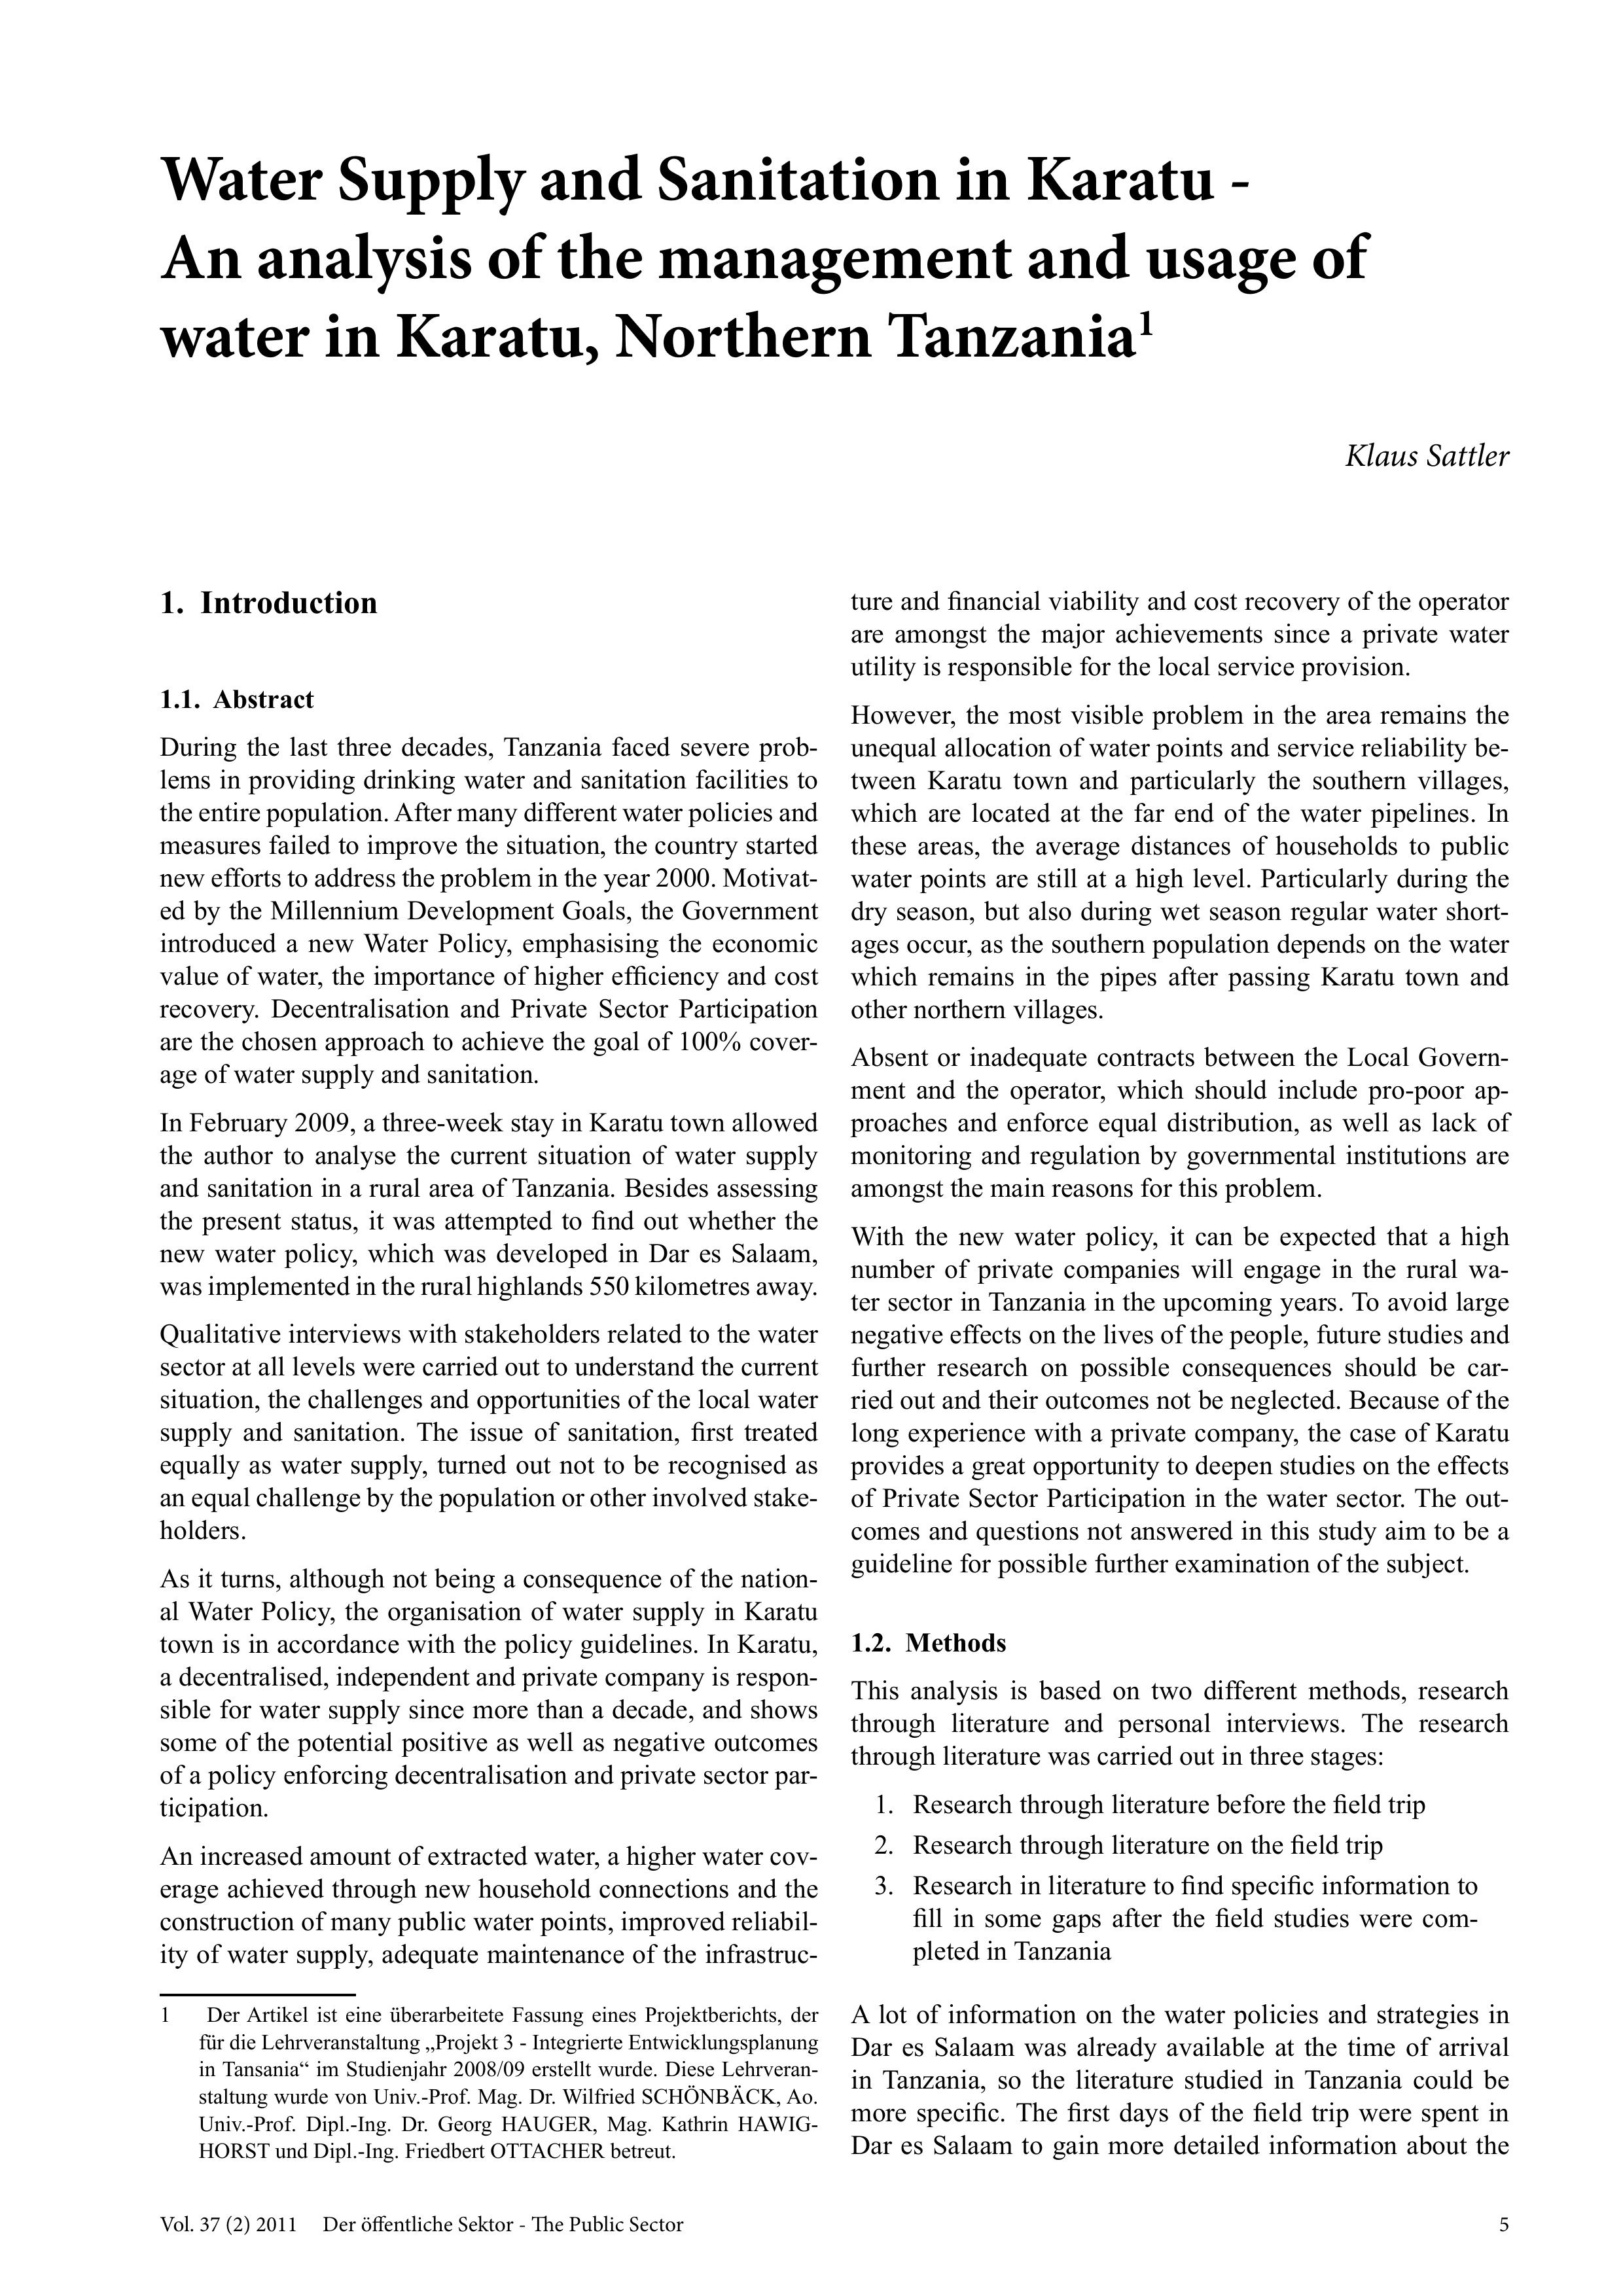 Water Supply and Sanitation in Karatu - An analysis of the management and usage of water in Karatu, Northern Tanzania